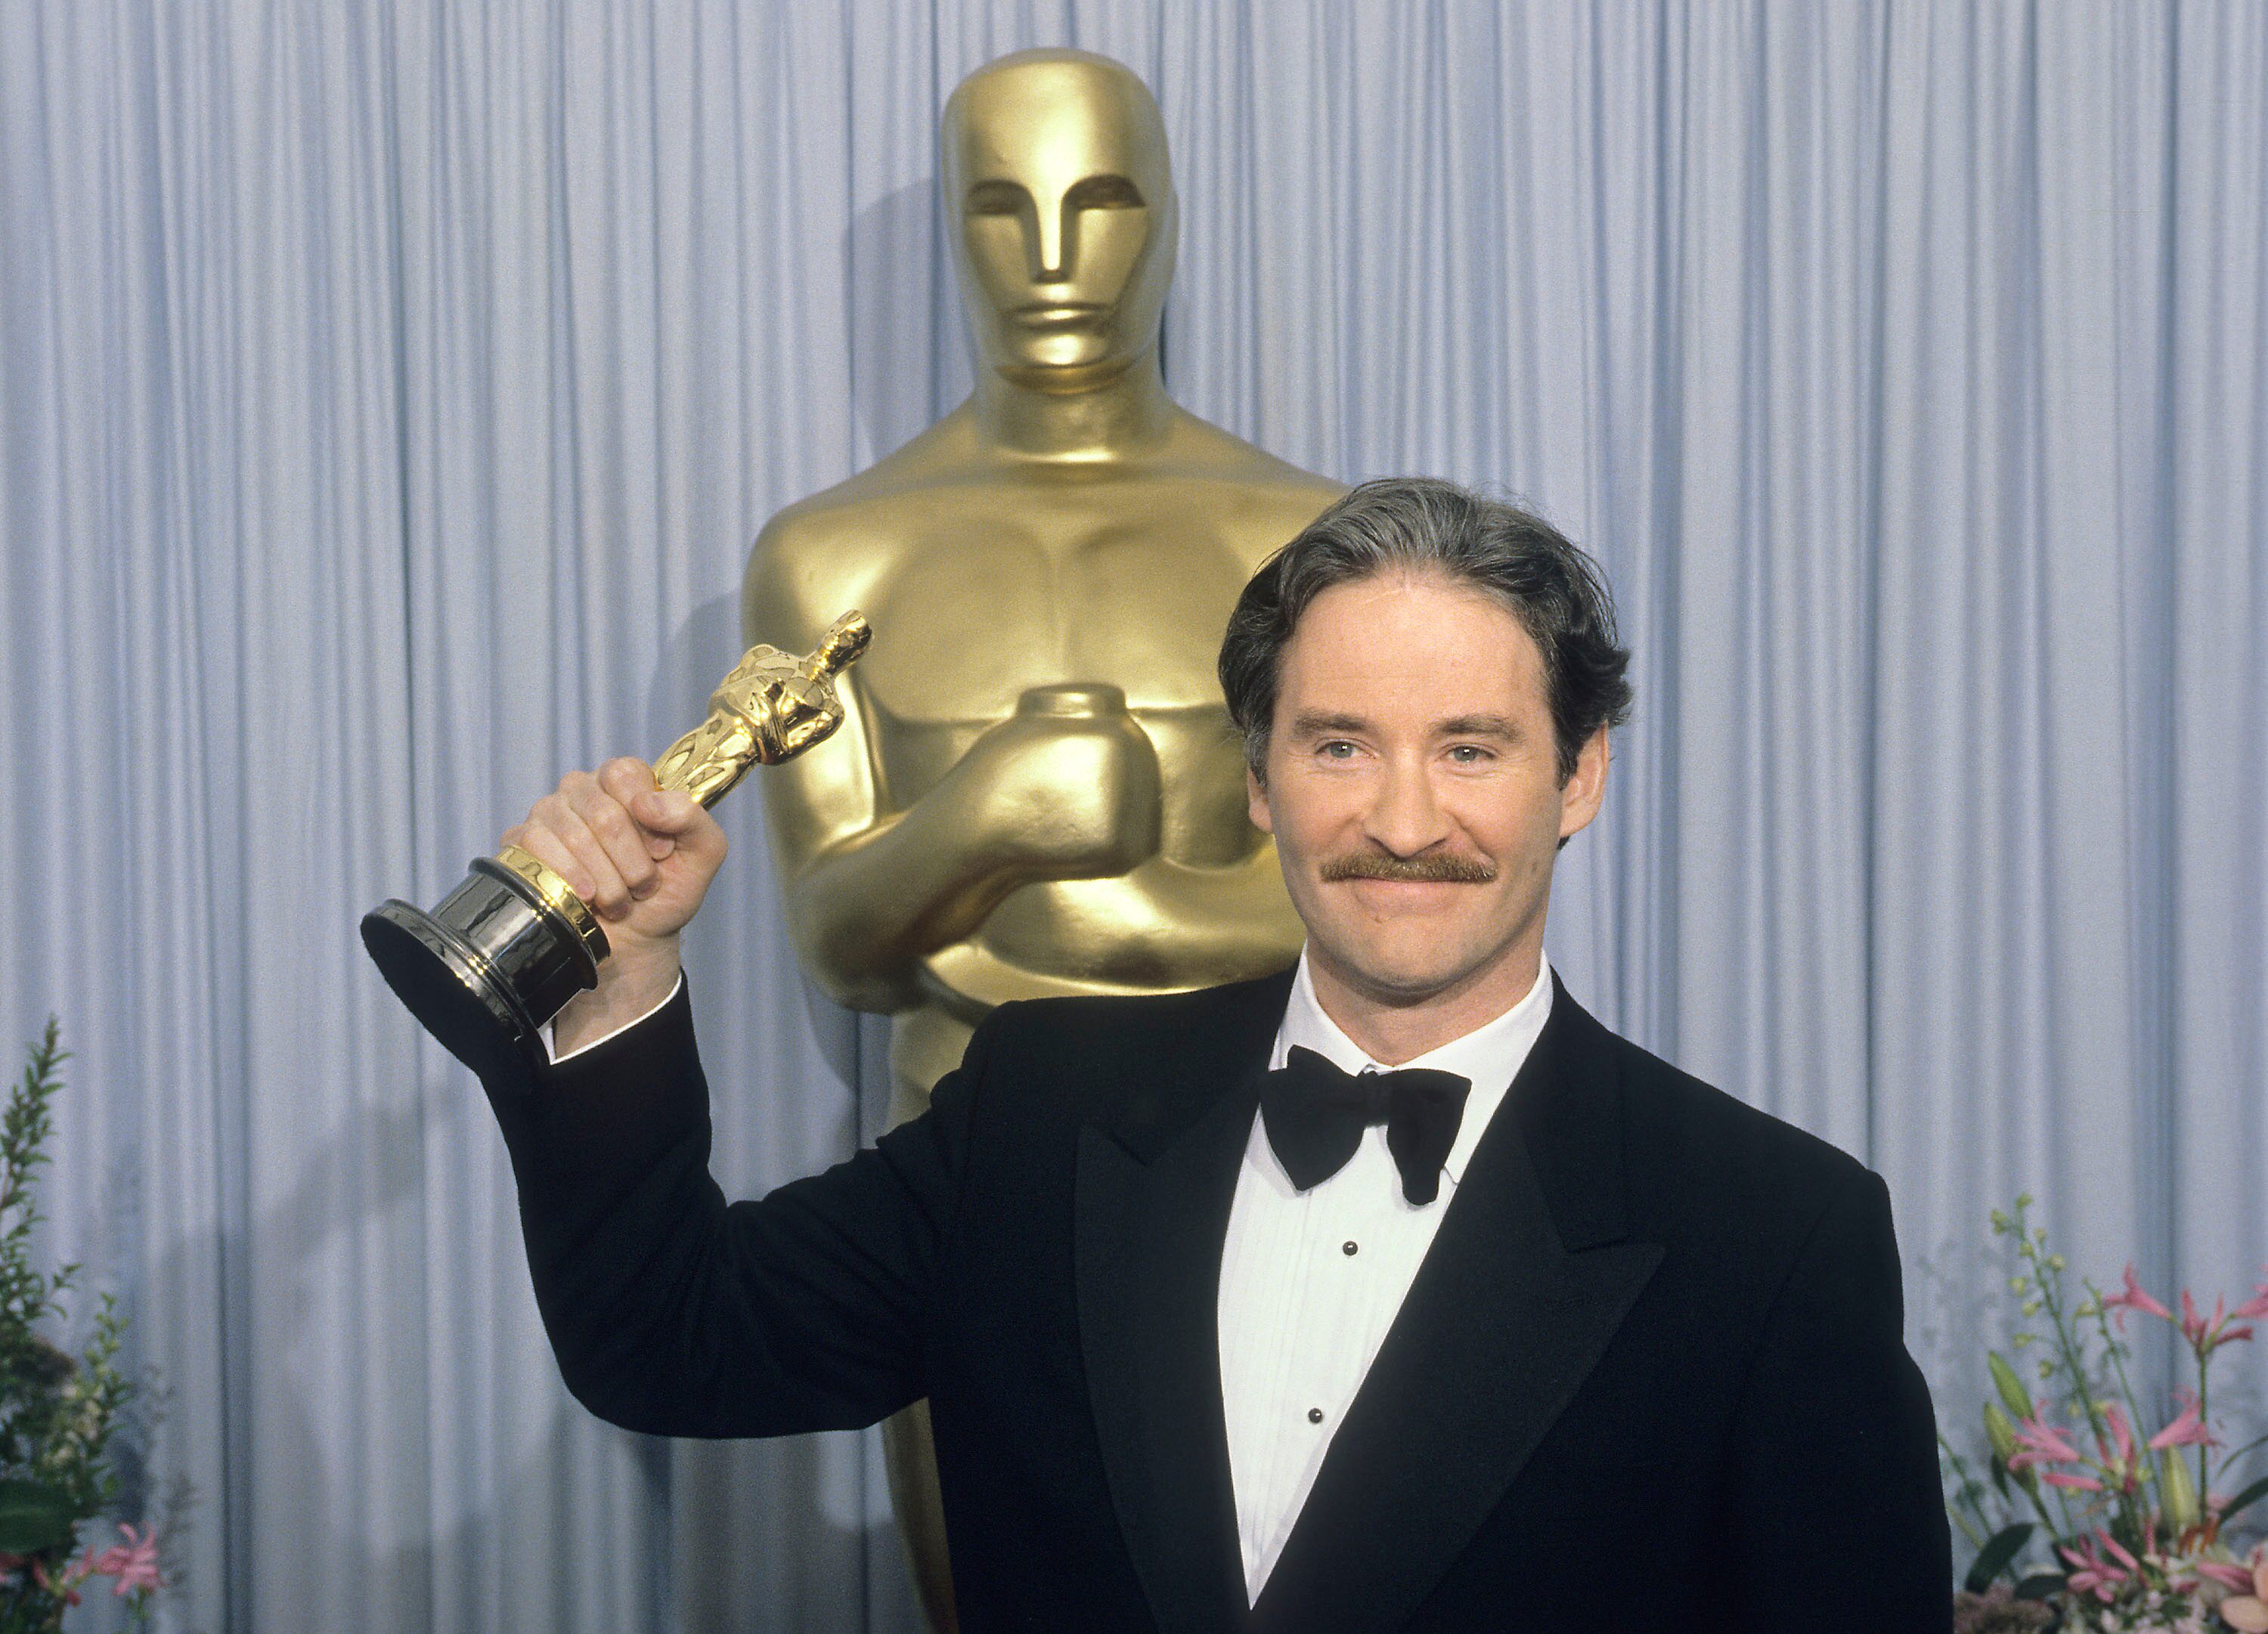 1989 | Oscars.org | Academy of Motion Picture Arts and Sciences3000 x 2162